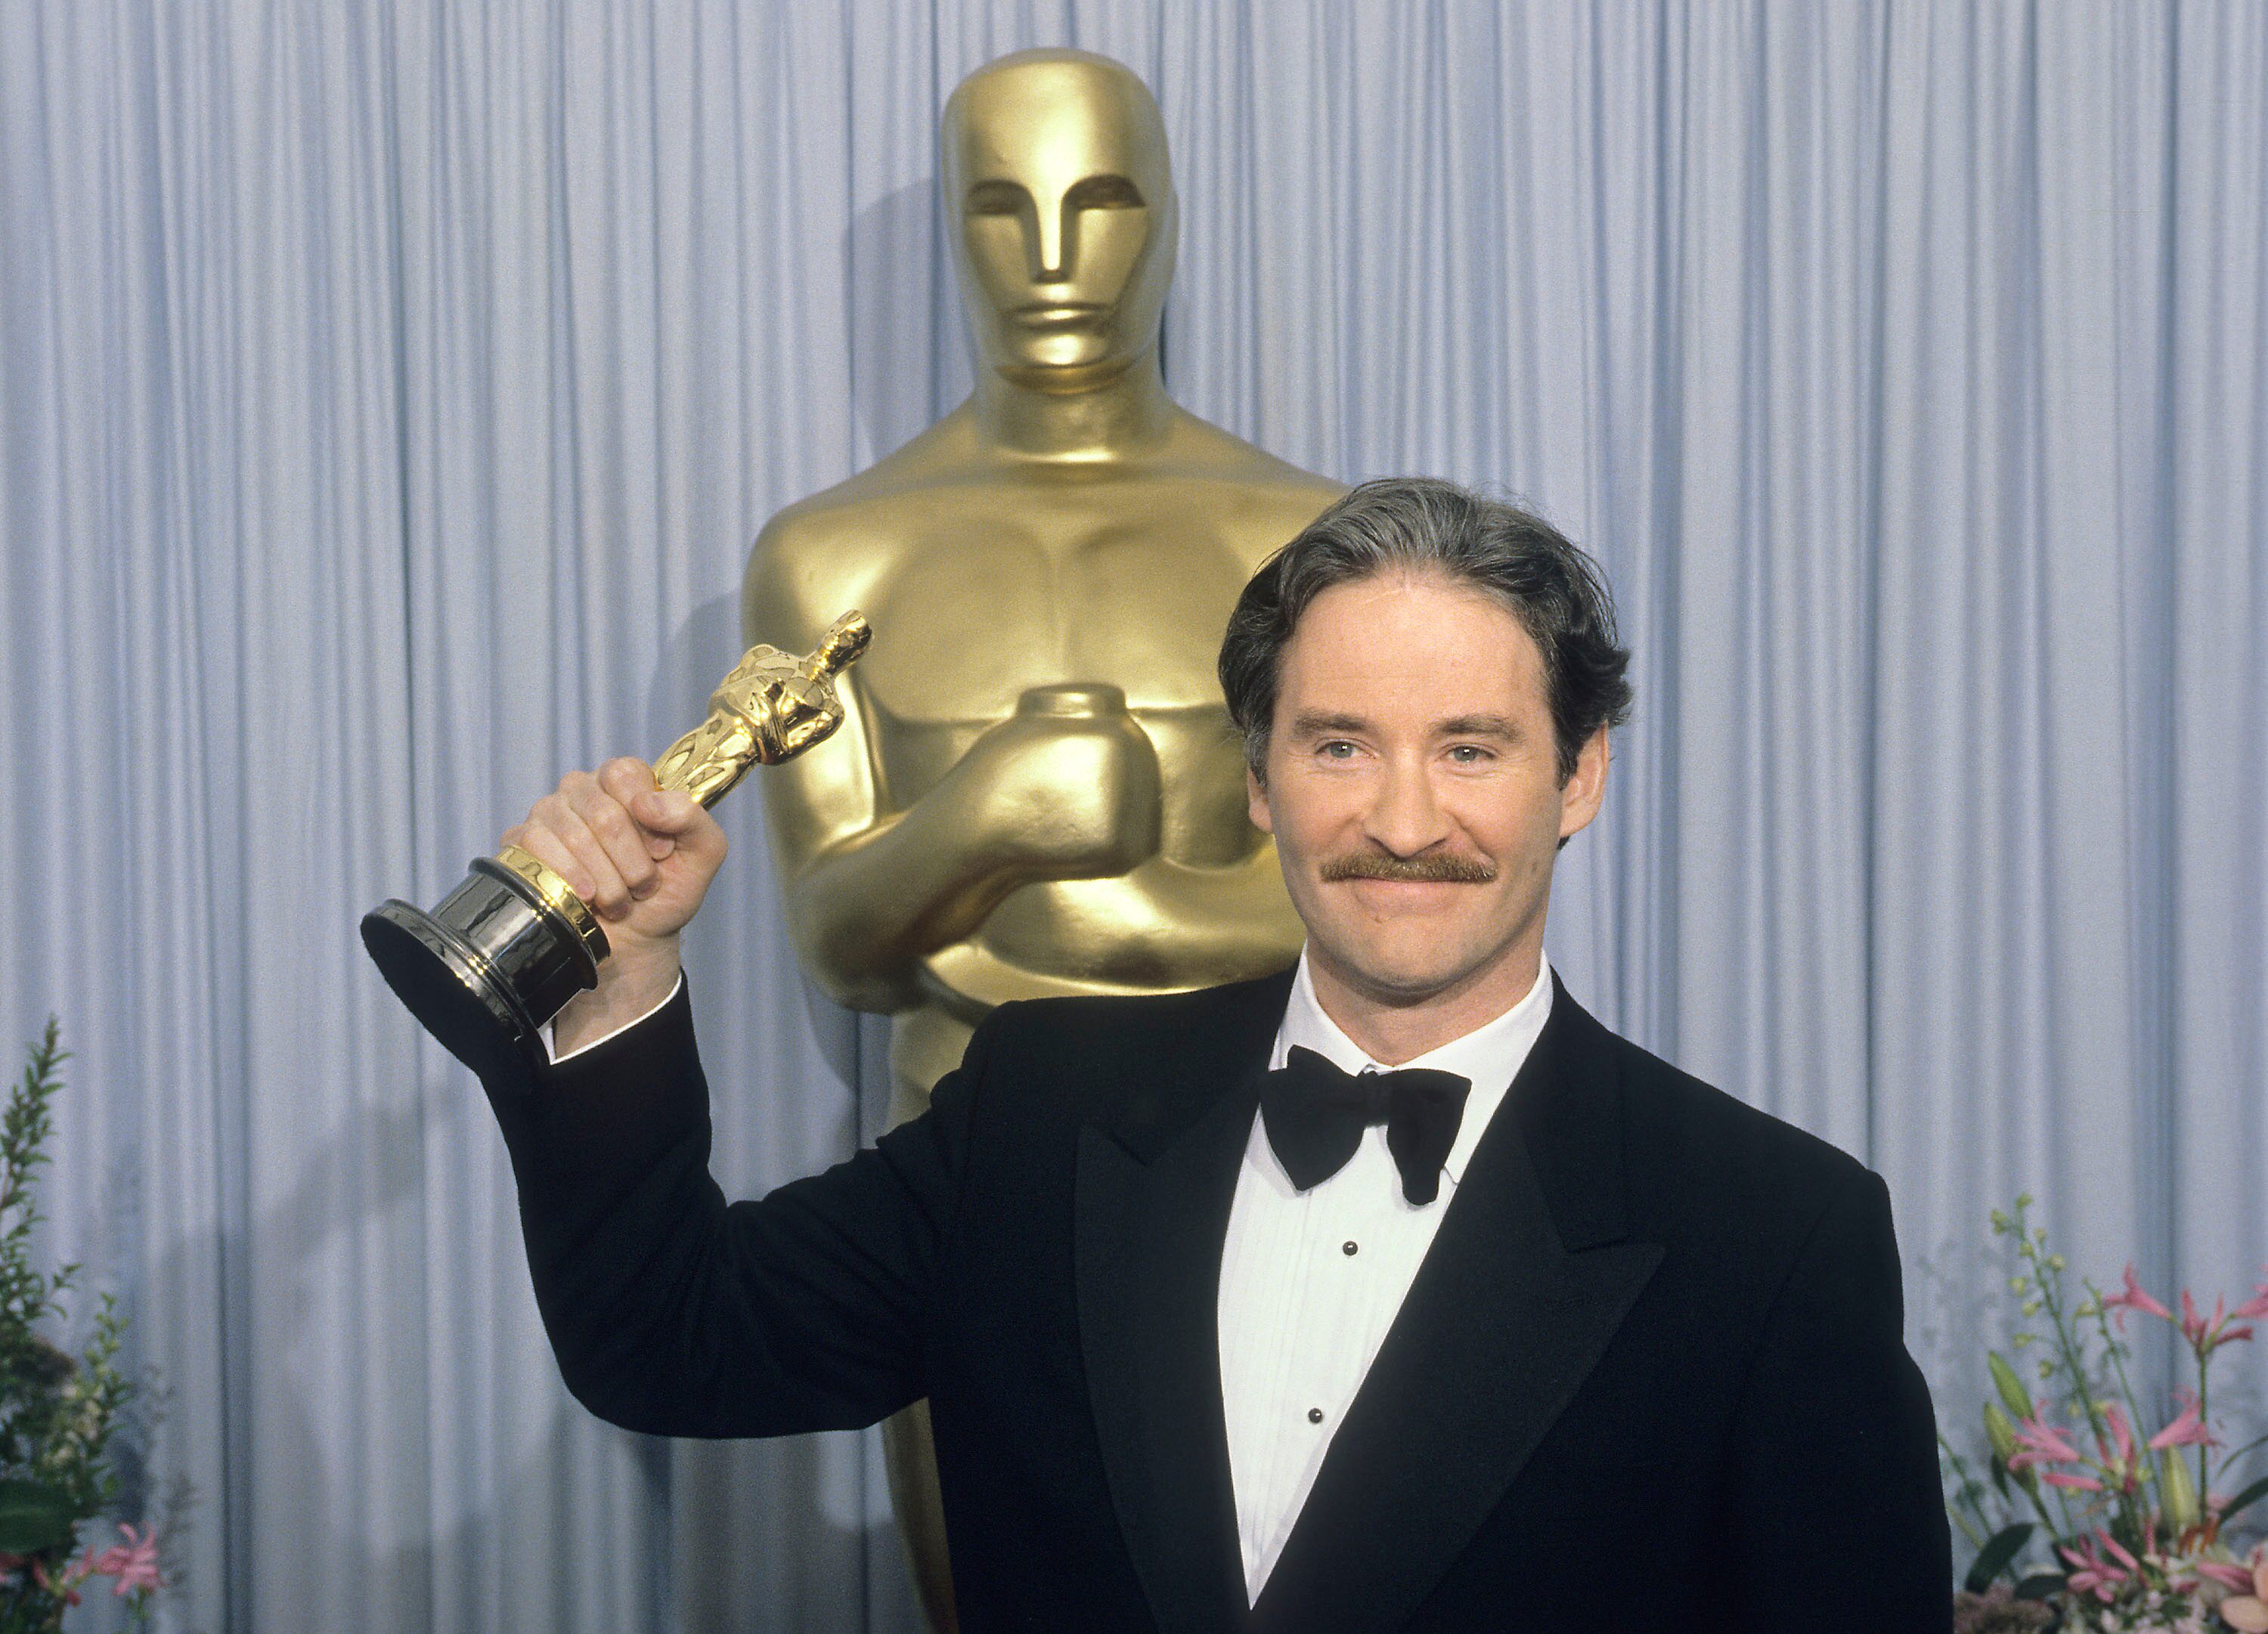 1989 | Oscars.org | Academy of Motion Picture Arts and Sciences3000 x 2162